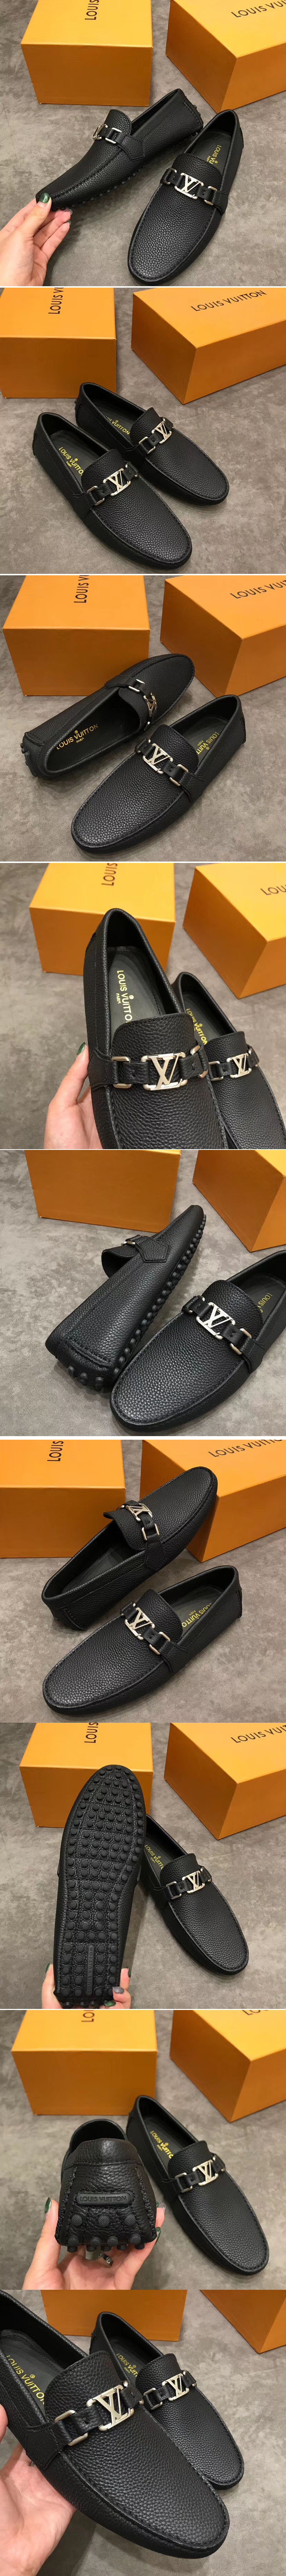 Replica Louis Vuitton LV Hockenheim Loafer And Shoes Black Calf Leather Silver Buckle